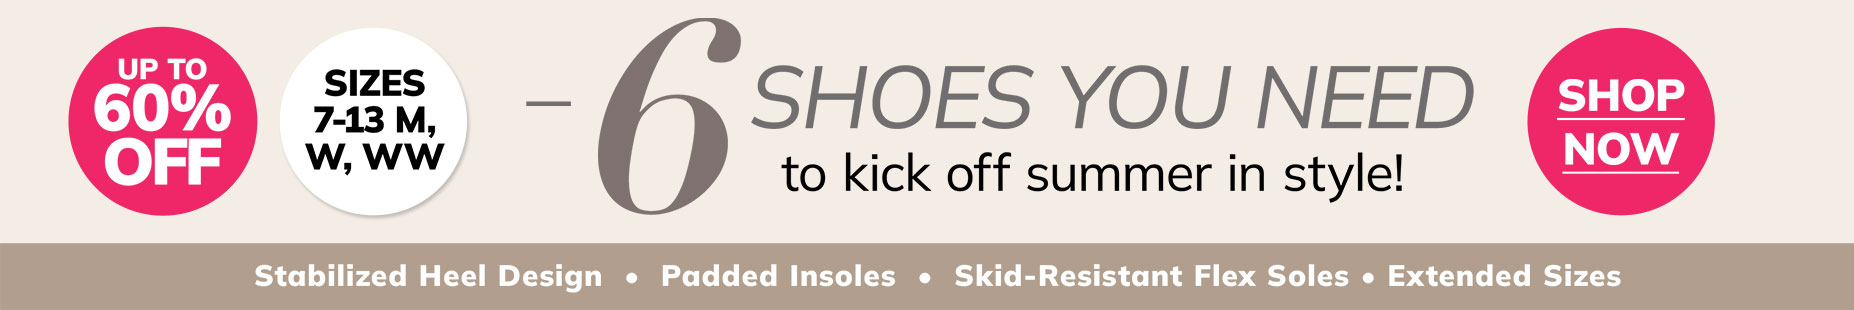 SHOES UP TO 60 OFF